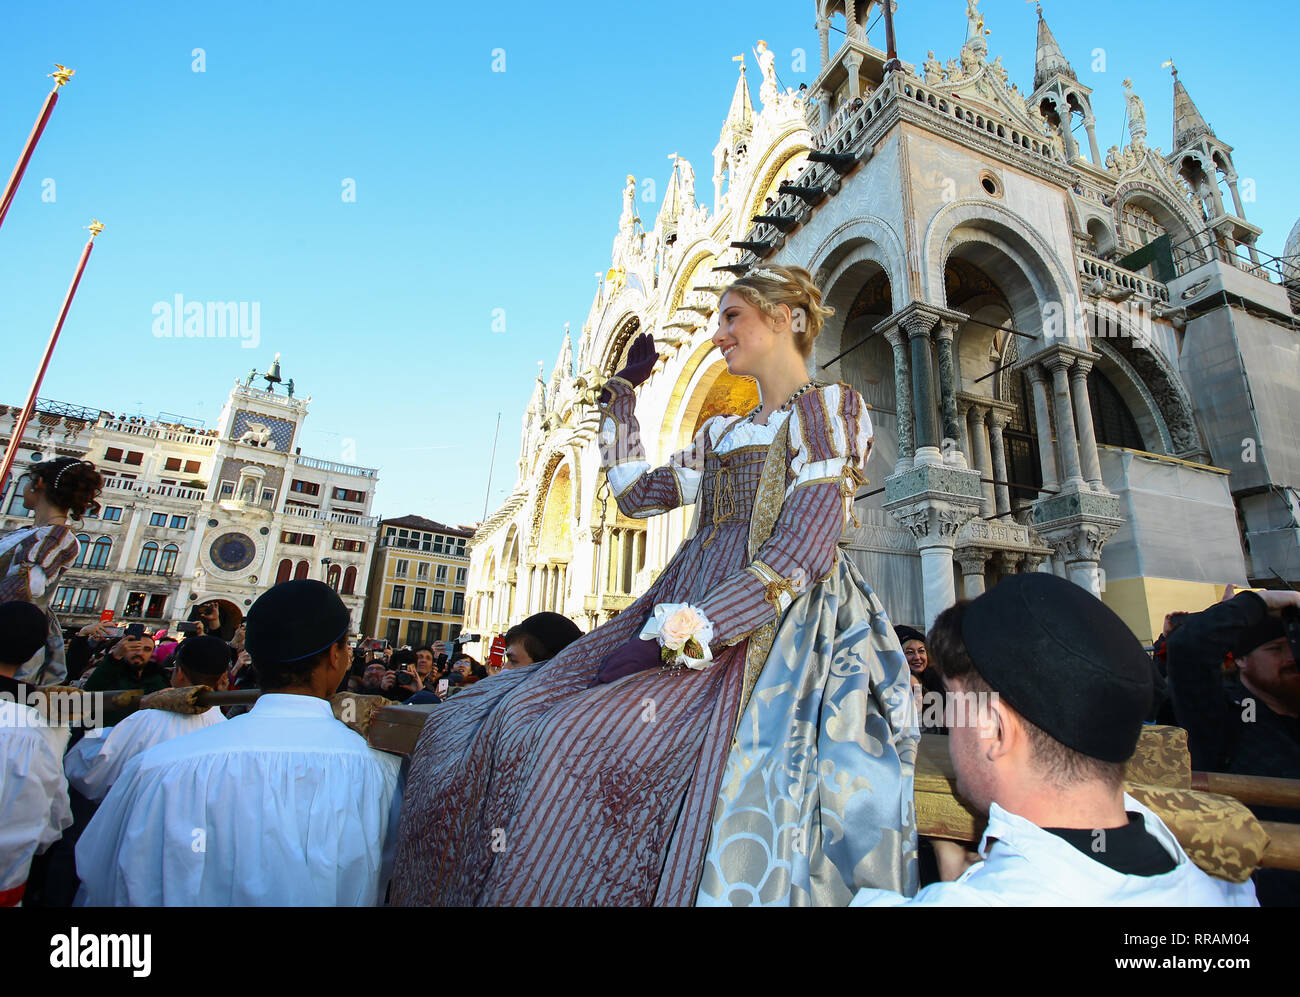 Venice, Italy. 23rd Feb, 2019. The homage that the Doge brought annually to twelve beautiful Venetian girls, giving them generously for the marriage with the dogali jewels has been renewed today with the 'Festa delle Marie', an appointment of the Venetian tradition. The event started in the early afternoon with the girls' parade, accompanied by historical costumed groups, from San Piero di Castello along Riva degli Schiavoni to the stage of Piazza San Marco where the official presentation of the Carnival from part of Prince Maurice Agosti. Credit: Independent Photo Agency/Alamy Live News Stock Photo